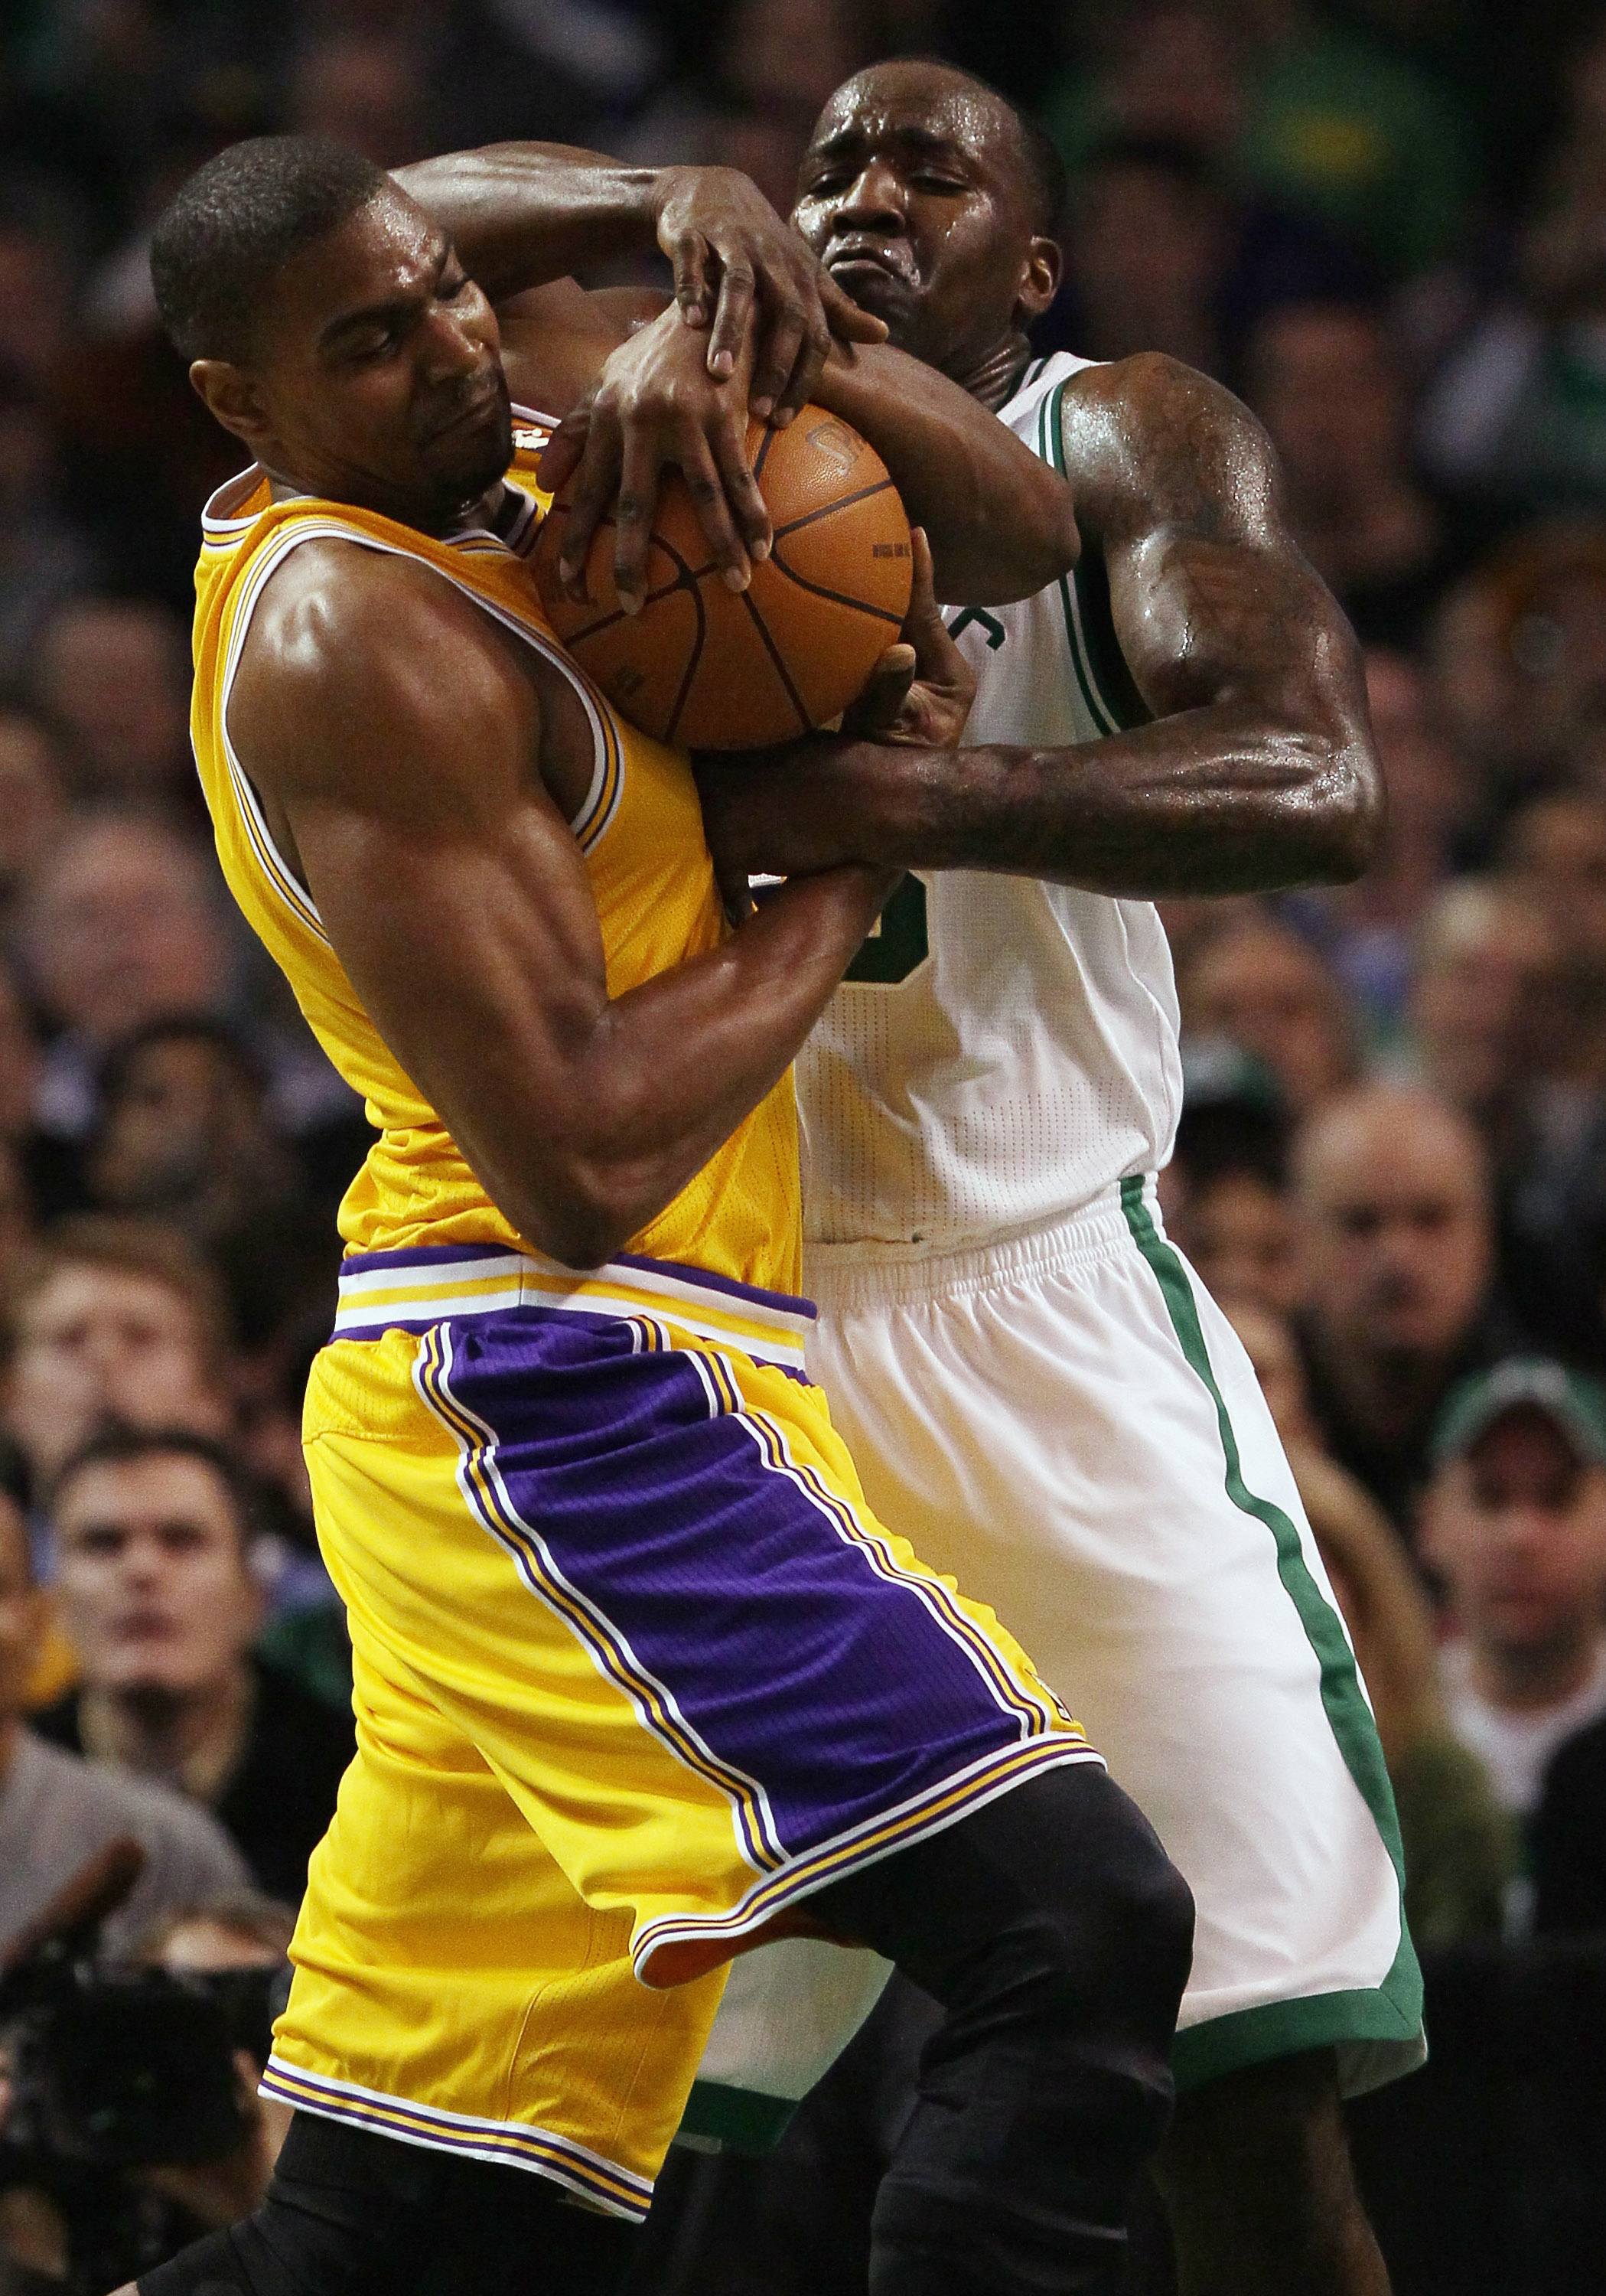 BOSTON, MA - FEBRUARY 10:  Kendrick Perkins #43 of the Boston Celtics and Andrew Bynum #17 of the Los Angeles Lakers fight for the ball in the first quarter against on February 10, 2011 at the TD Garden in Boston, Massachusetts.  NOTE TO USER: User expres